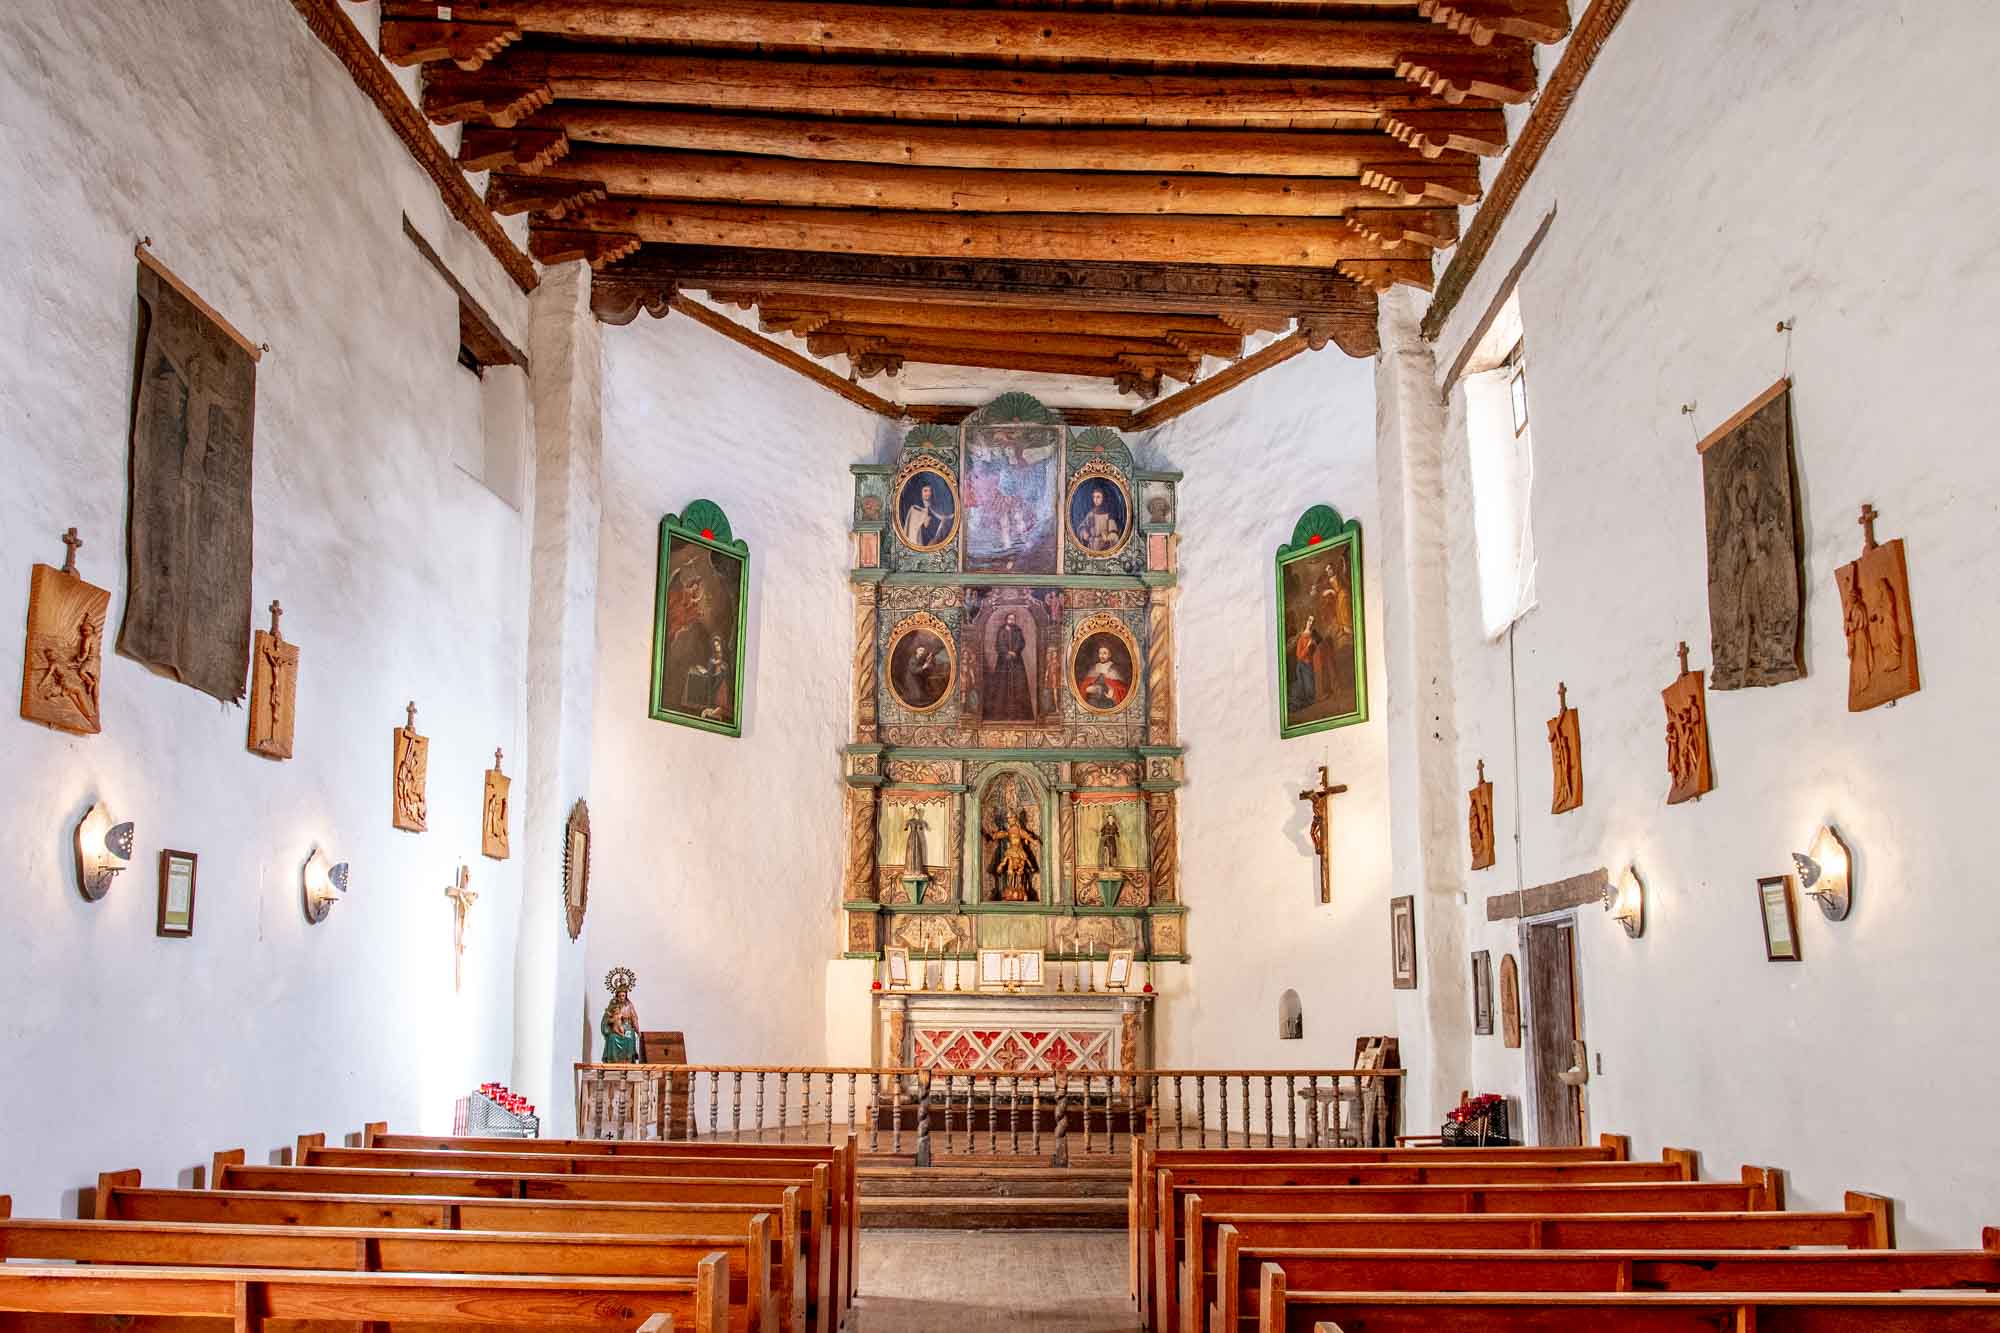 Chapel with pews, white walls, and a painted screen at the altar with multiple images of saints.